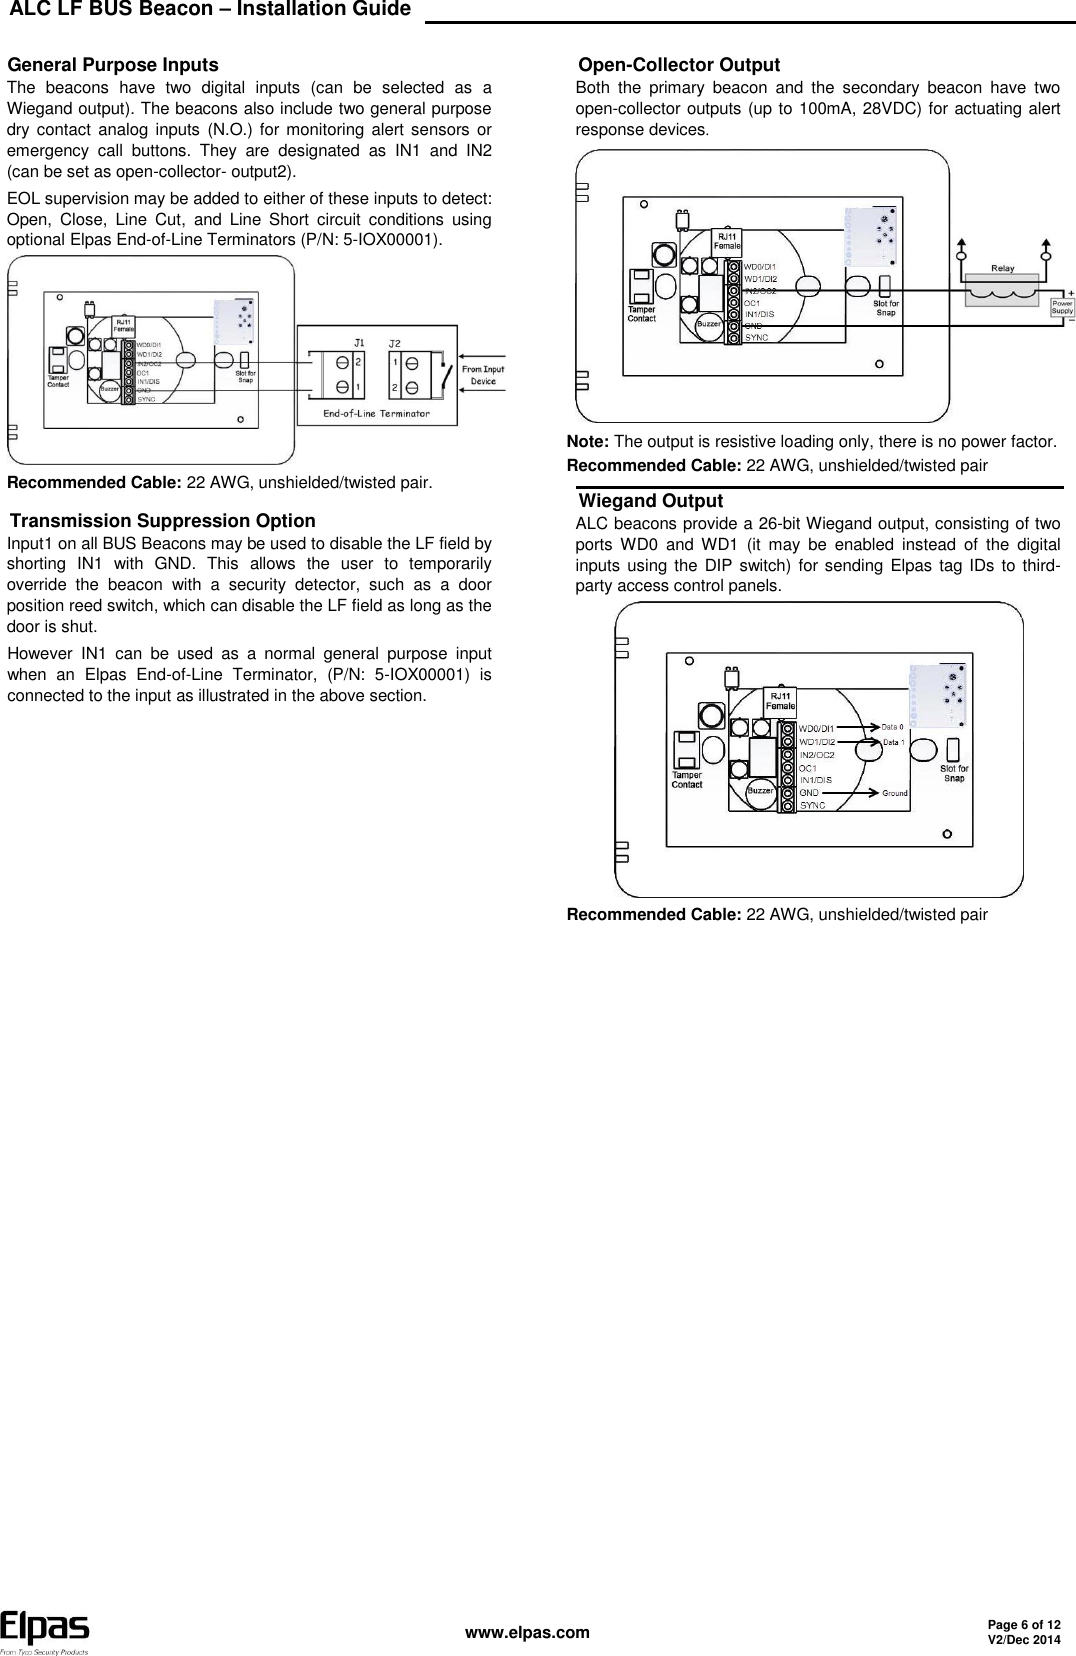 ALC LF BUS Beacon – Installation Guide    www.elpas.com Page 6 of 12 V2/Dec 2014   General Purpose Inputs The  beacons  have  two  digital  inputs  (can  be  selected  as  a Wiegand output). The beacons also include two general purpose dry contact analog inputs (N.O.) for monitoring  alert sensors  or emergency  call  buttons.  They  are  designated  as  IN1  and  IN2 (can be set as open-collector- output2). EOL supervision may be added to either of these inputs to detect: Open,  Close,  Line  Cut,  and  Line  Short  circuit  conditions  using optional Elpas End-of-Line Terminators (P/N: 5-IOX00001).  Recommended Cable: 22 AWG, unshielded/twisted pair. Transmission Suppression Option Input1 on all BUS Beacons may be used to disable the LF field by shorting  IN1  with  GND.  This  allows  the  user  to  temporarily override  the  beacon  with  a  security  detector,  such  as  a  door position reed switch, which can disable the LF field as long as the door is shut. However  IN1  can  be  used  as  a  normal  general  purpose  input when  an  Elpas  End-of-Line  Terminator,  (P/N:  5-IOX00001)  is connected to the input as illustrated in the above section.  Open-Collector Output Both  the  primary  beacon  and  the  secondary  beacon  have  two open-collector outputs (up to 100mA, 28VDC) for actuating alert response devices.  Note: The output is resistive loading only, there is no power factor. Recommended Cable: 22 AWG, unshielded/twisted pair Wiegand Output ALC beacons provide a 26-bit Wiegand output, consisting of two ports  WD0  and  WD1  (it  may  be  enabled  instead  of  the  digital inputs using the DIP switch) for sending  Elpas tag IDs  to  third-party access control panels.  Recommended Cable: 22 AWG, unshielded/twisted pair     